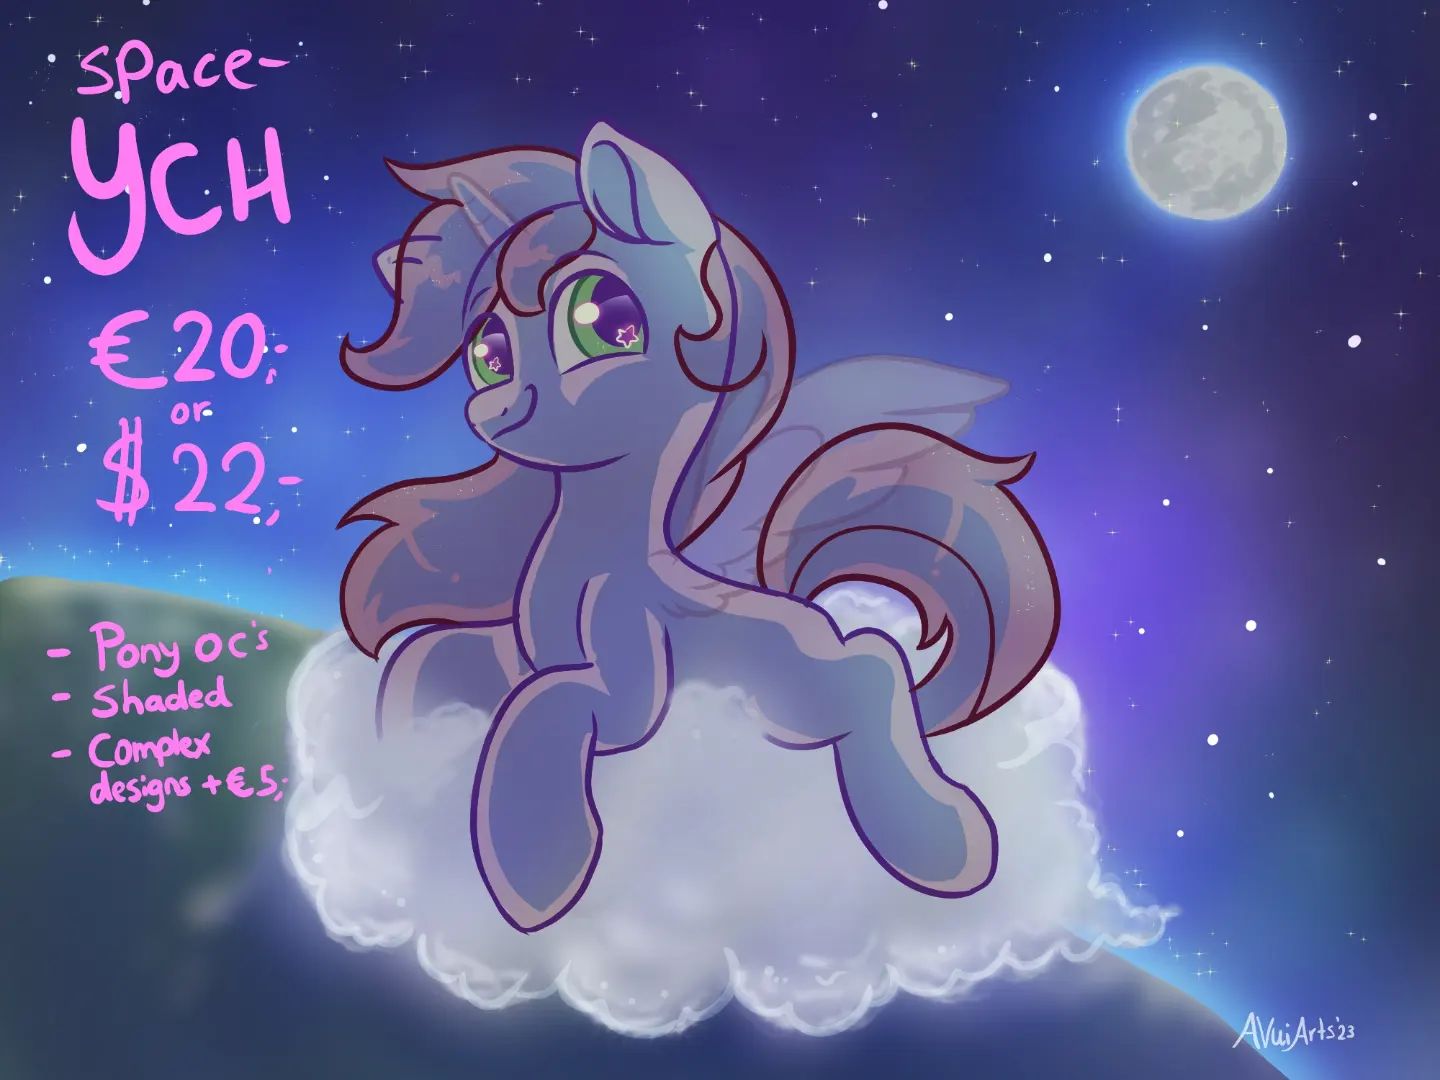 Space YCH! DM me to get one! Pony OC only!